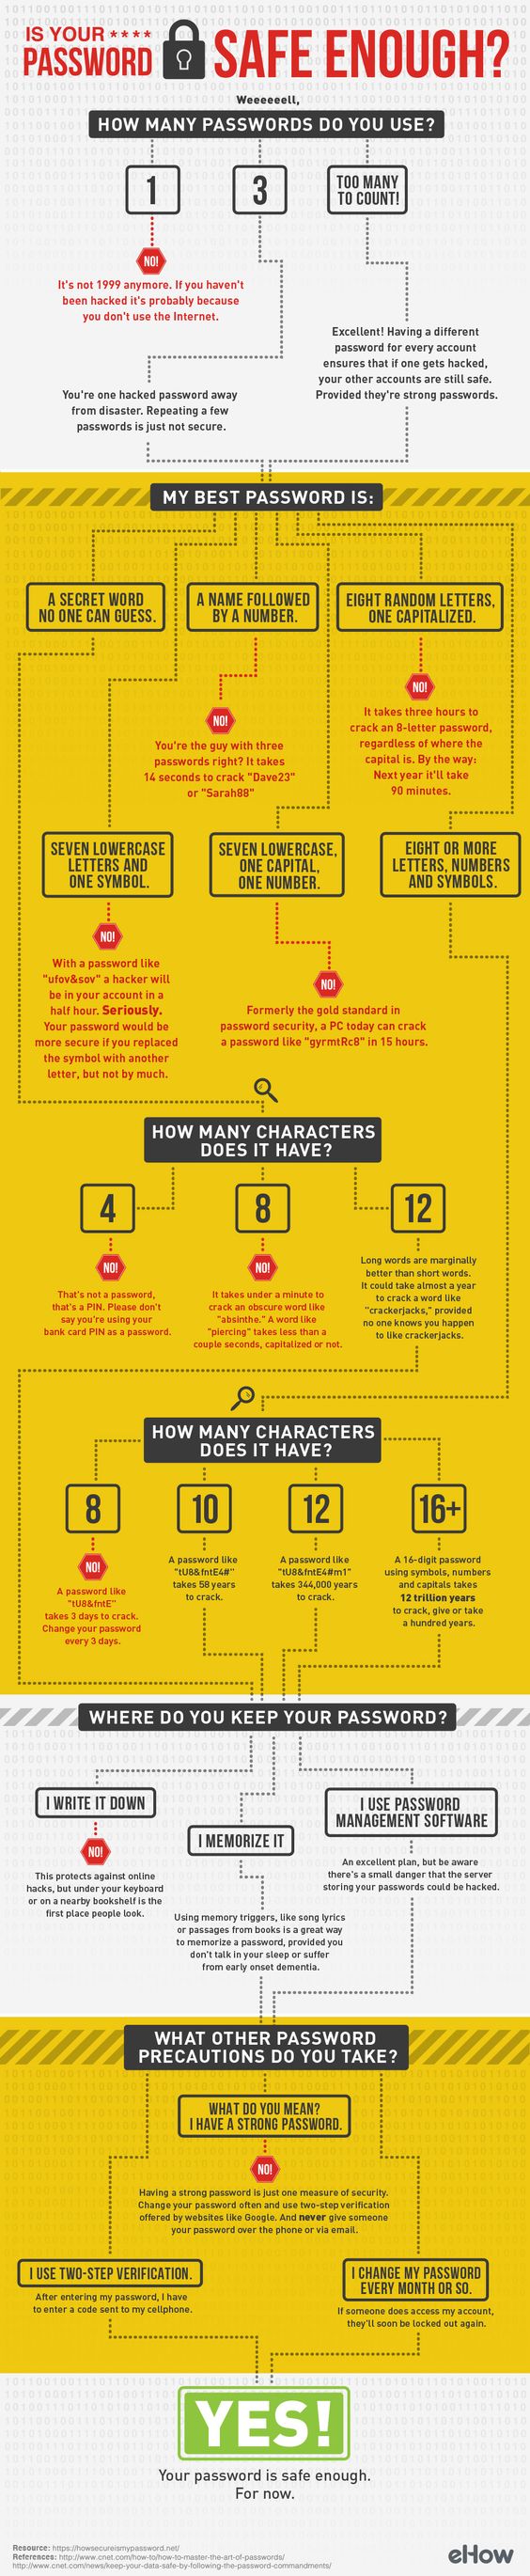 Is your password safe? This decision tree helps you figure out how safe your passwords are.